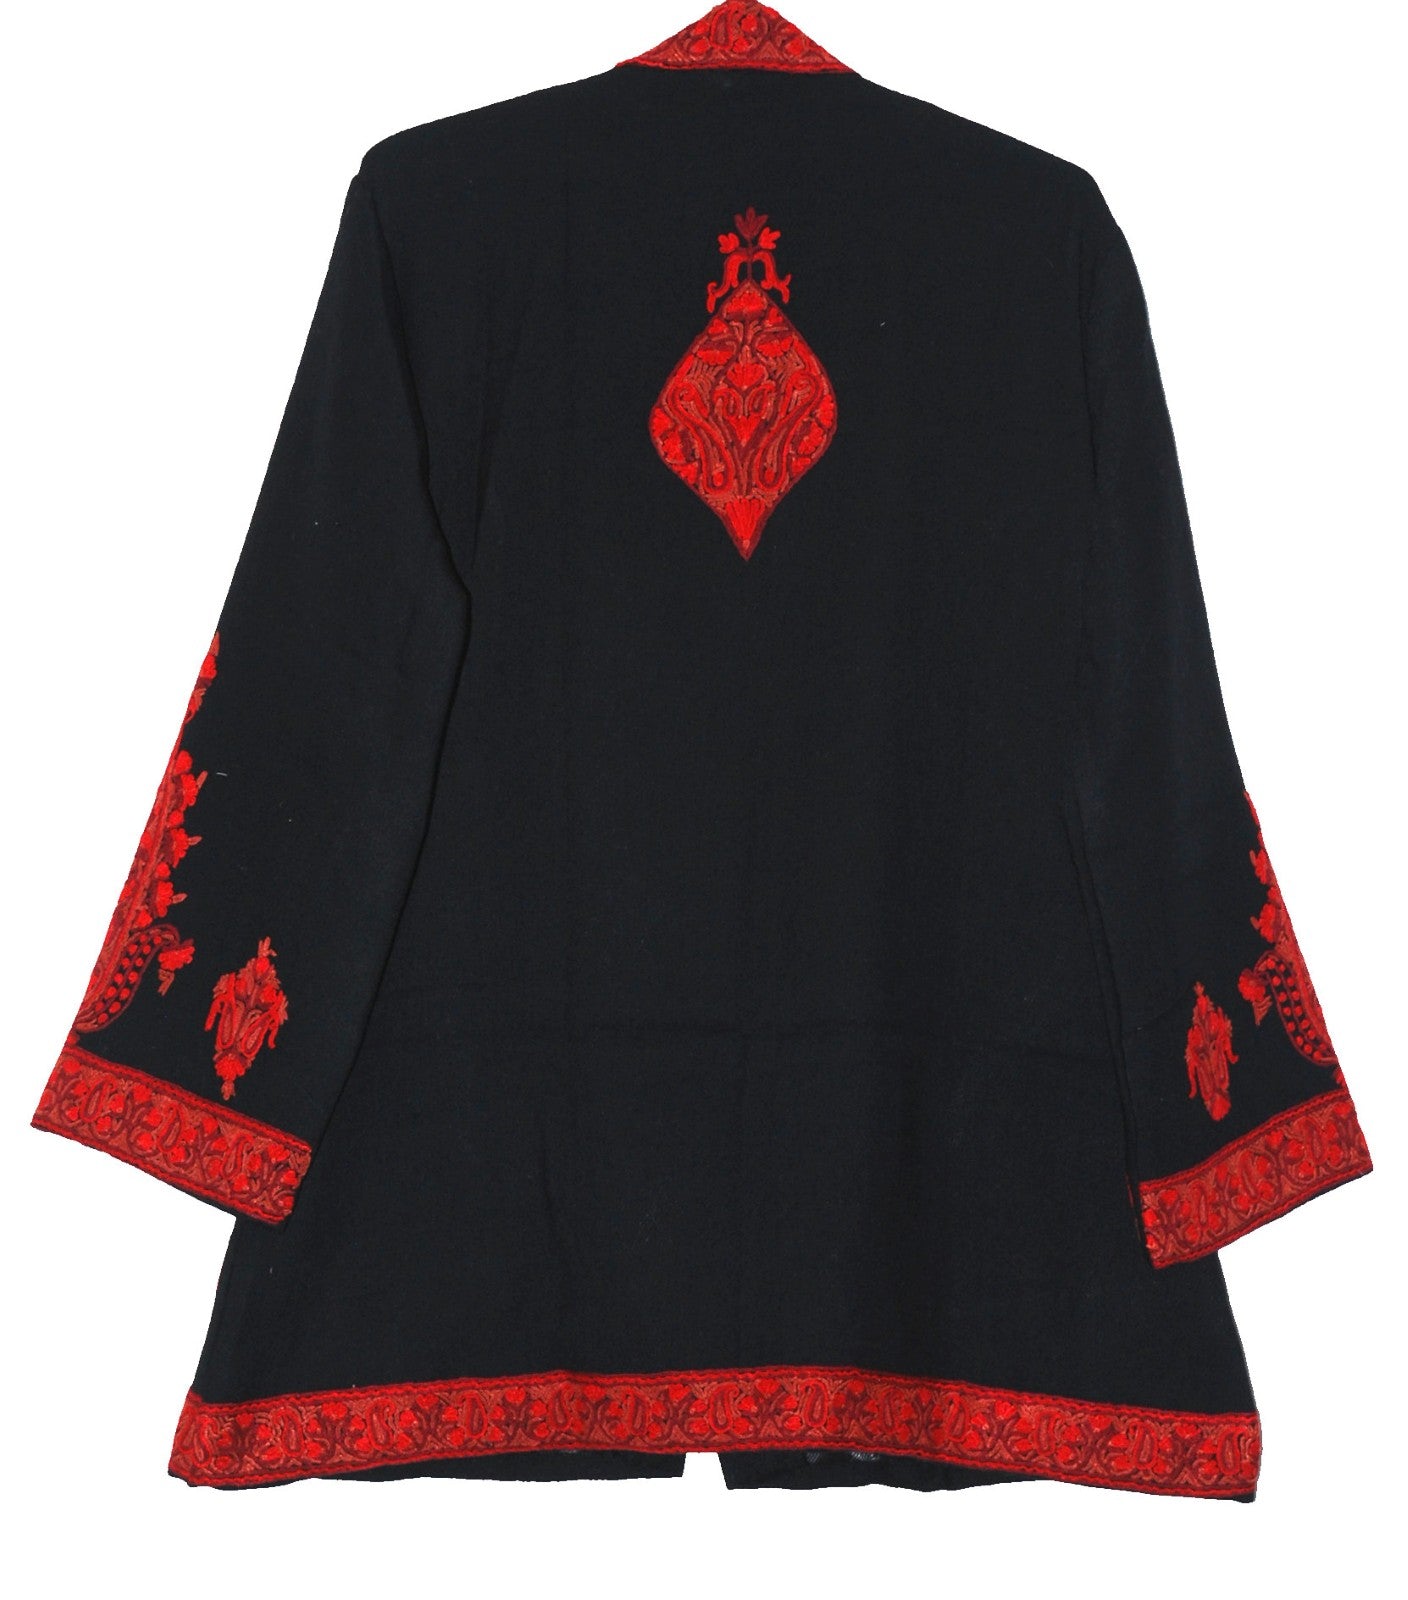 Embroidered Woolen Jacket Black, Red Embroidery #AO-023